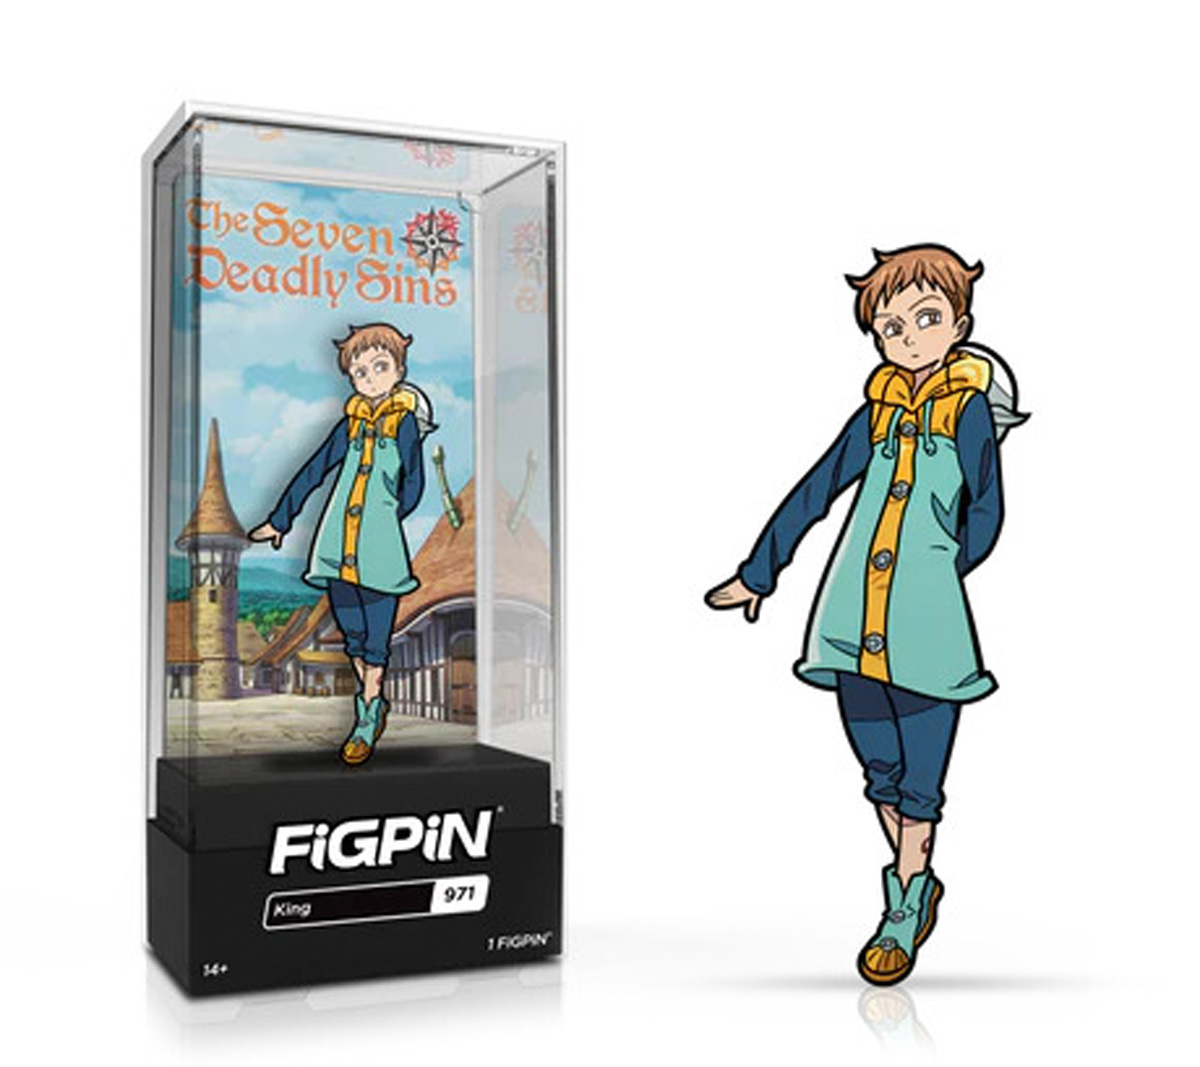 King The Seven Deadly Sins Limited Edition FiGPiN image count 3